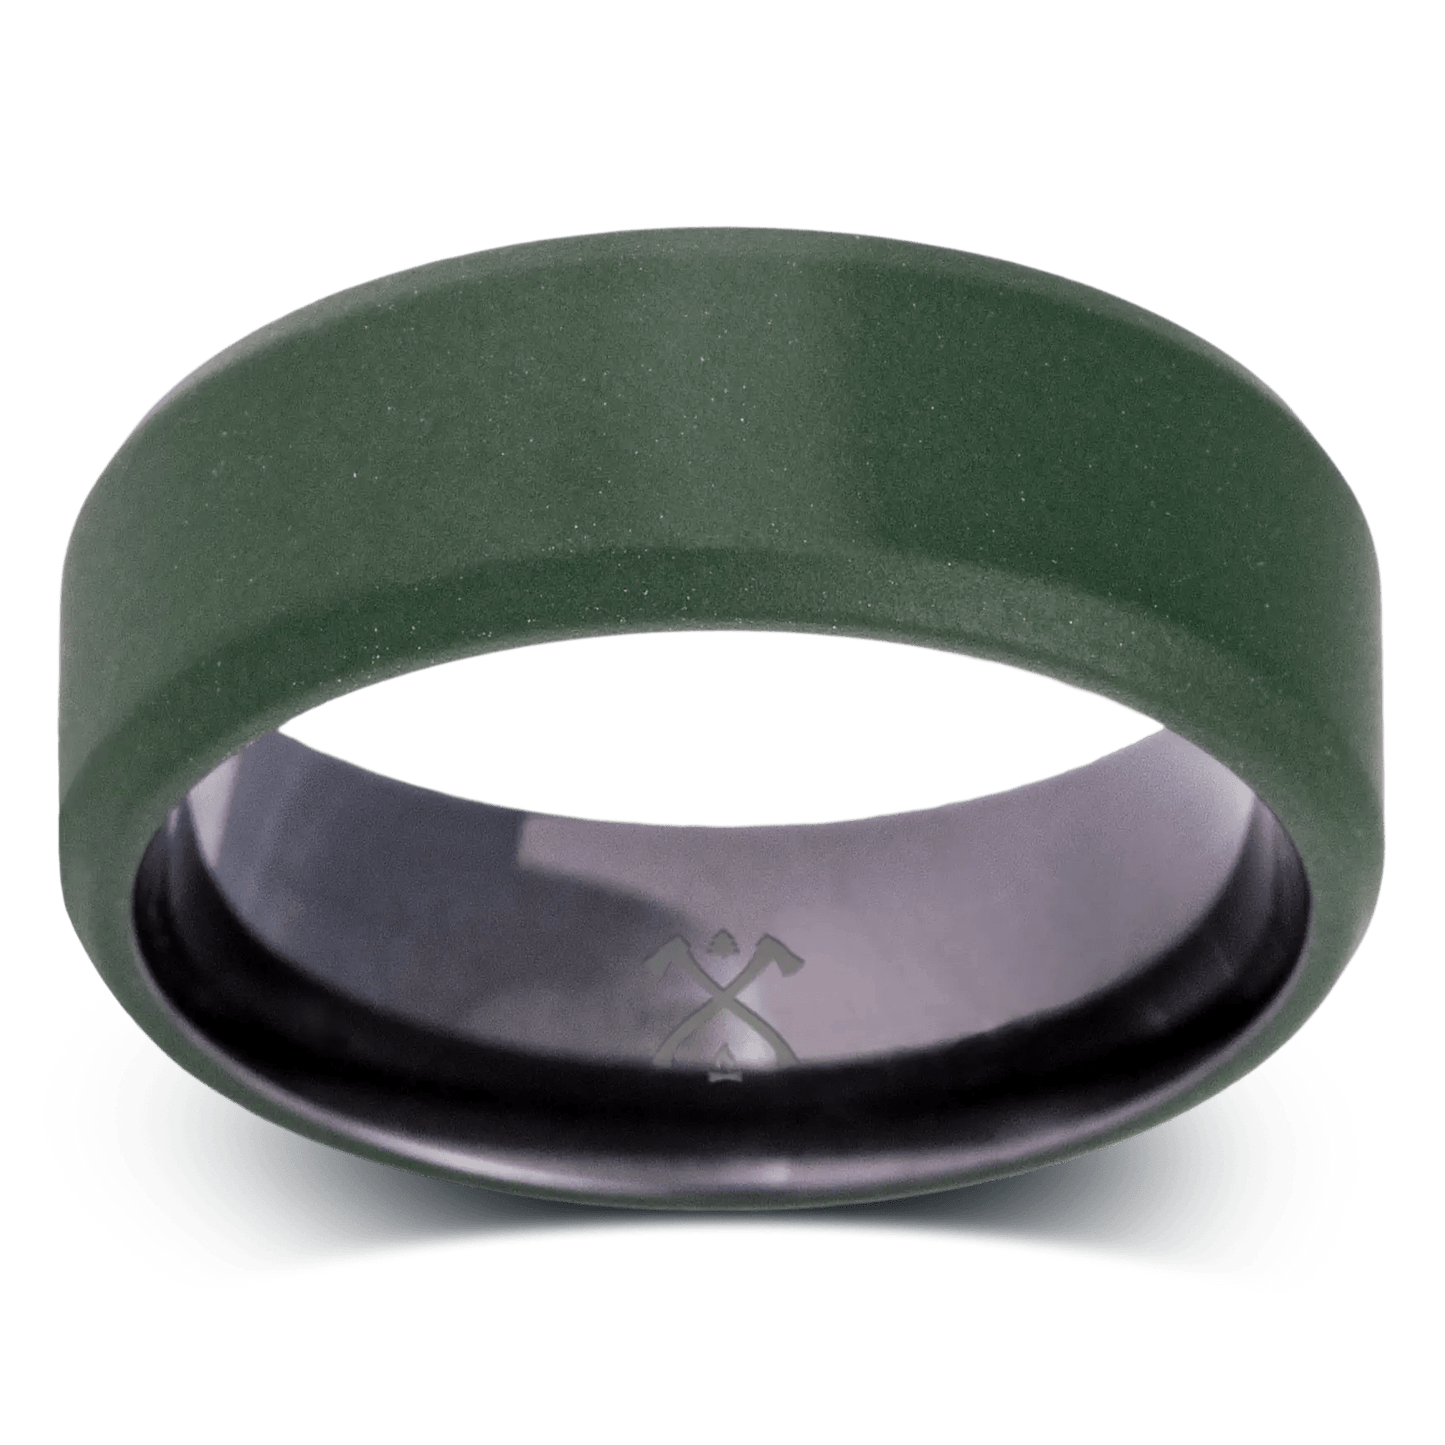 The Tactical - Black Ceramic Ring | Manly Bands